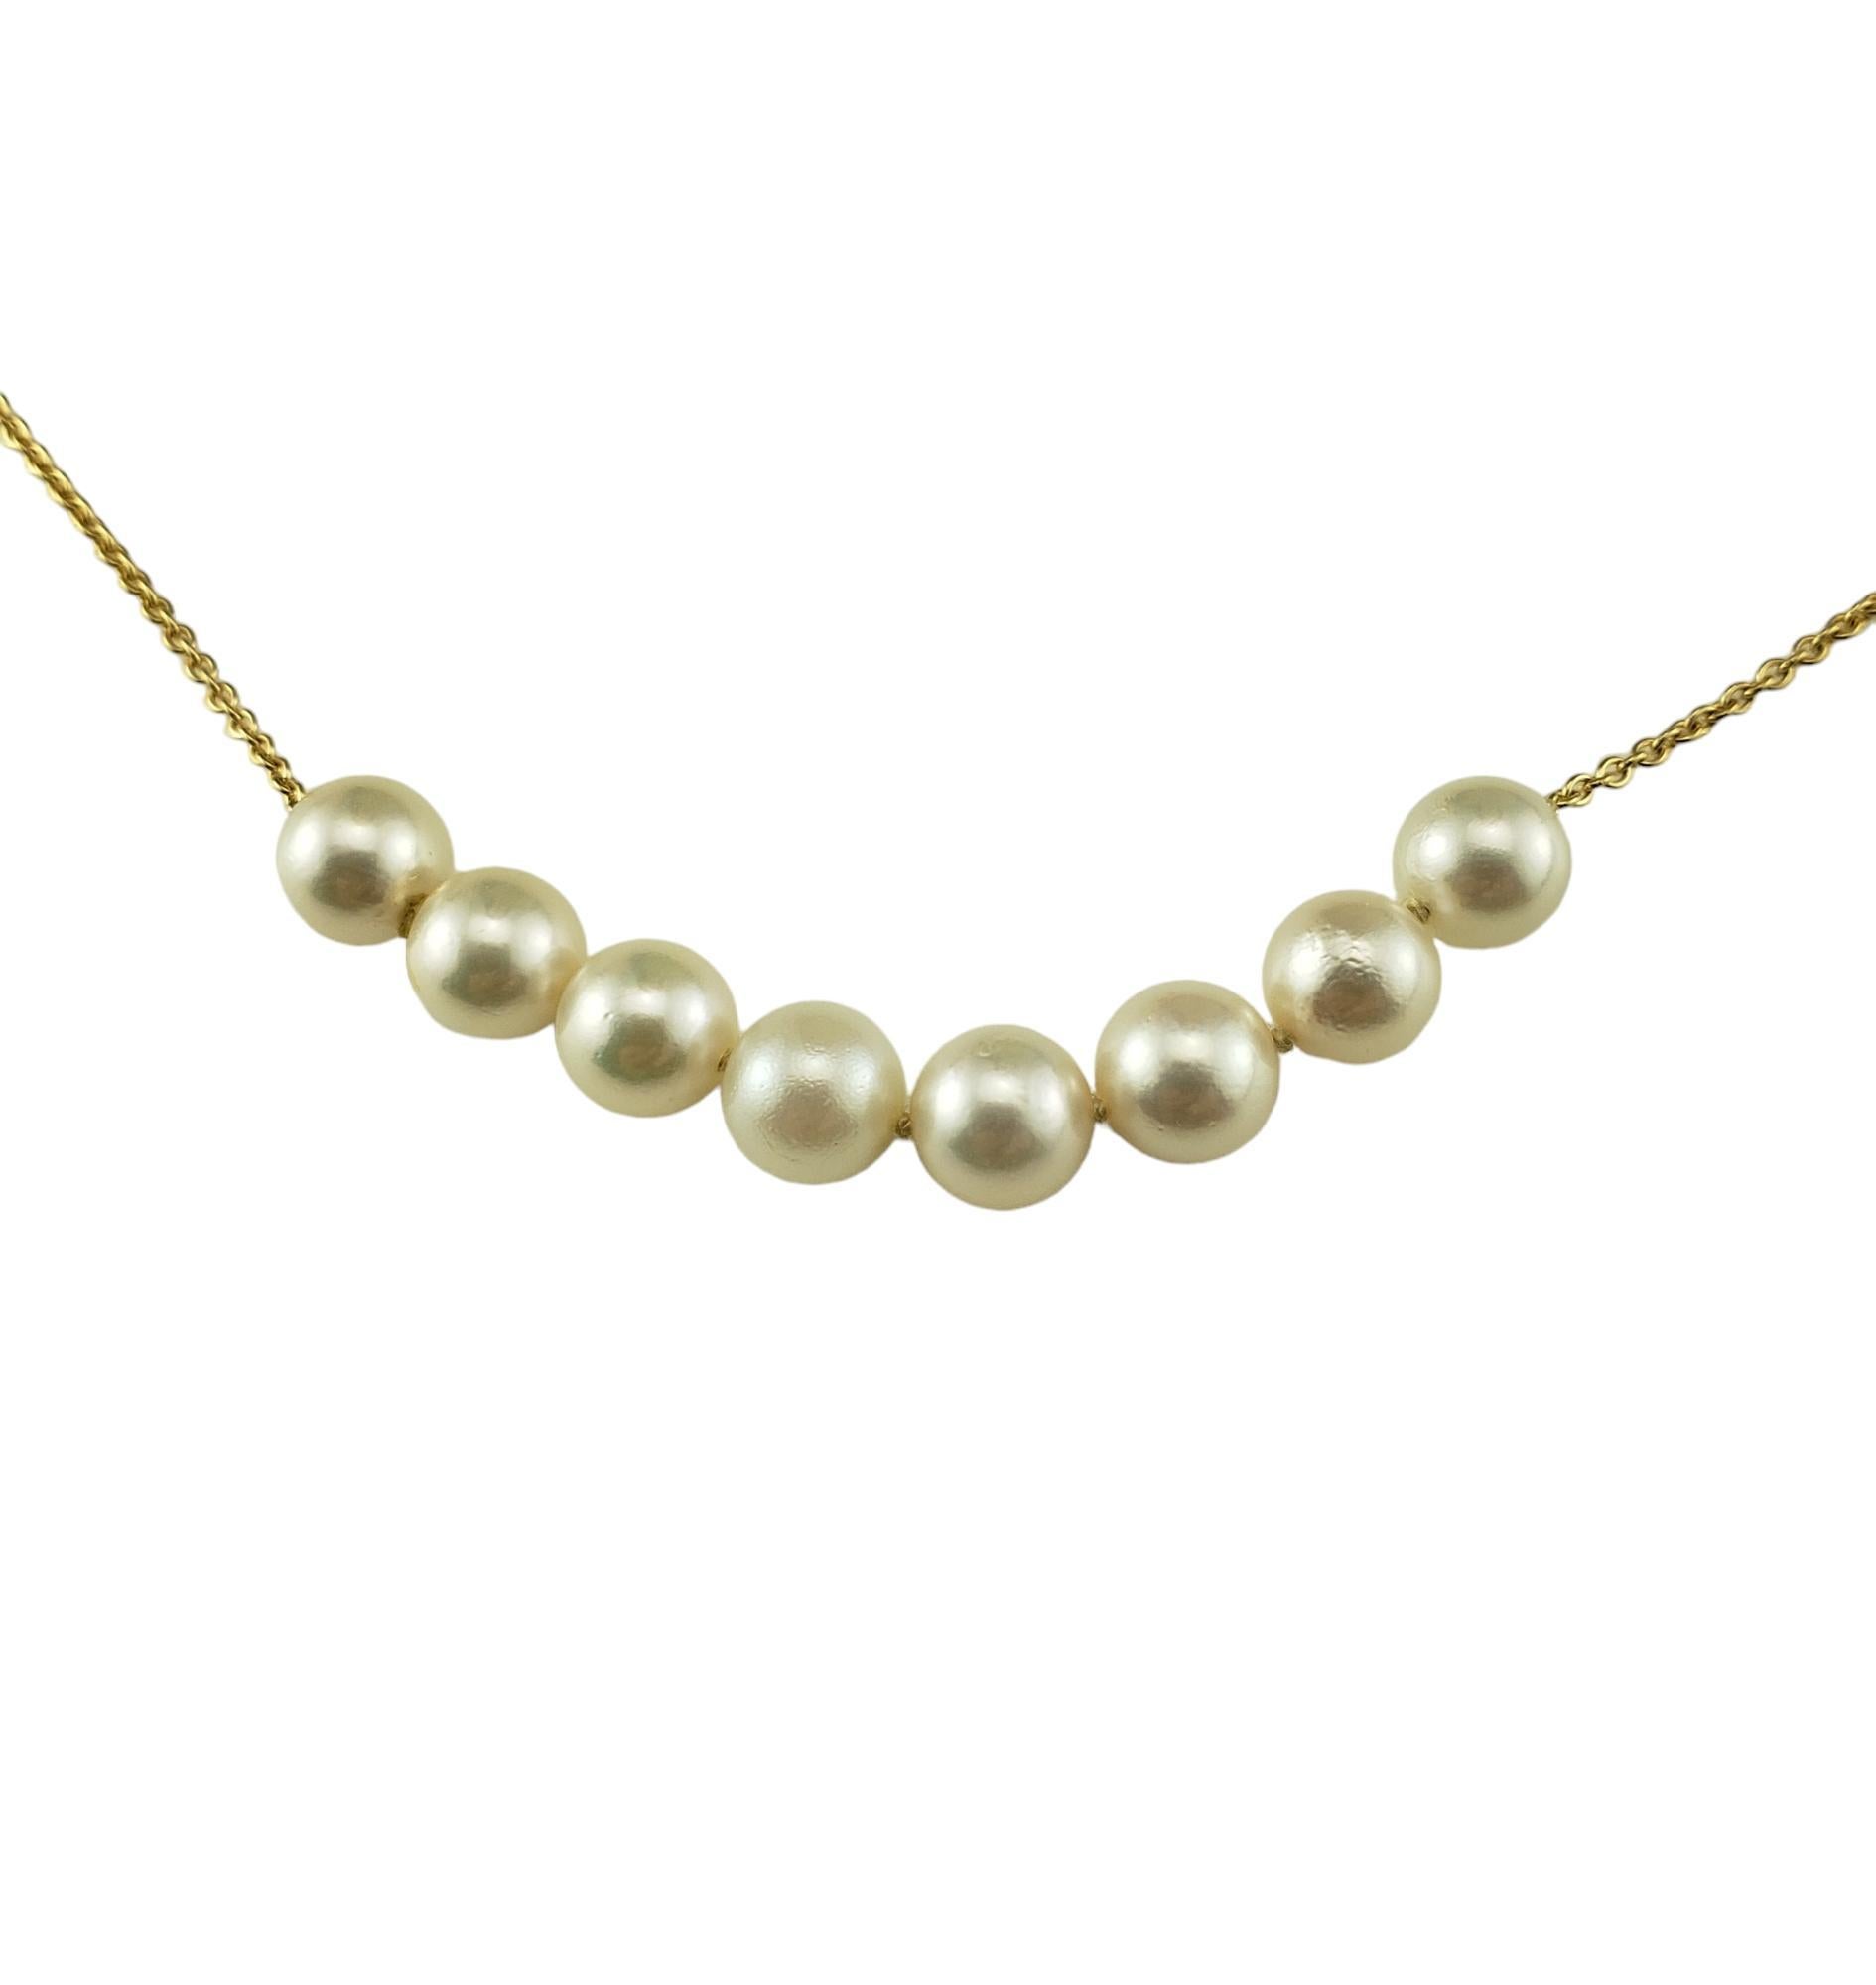 14 Karat Yellow Gold and Pearl Necklace

This elegant necklace features eight round white pearls (7 mm each) set on a classic 14K yellow gold necklace.

Size: 18 inches 

Stamped: 14K

Weight: 3.5 dwt./5.4 gr.

Very good condition, professionally